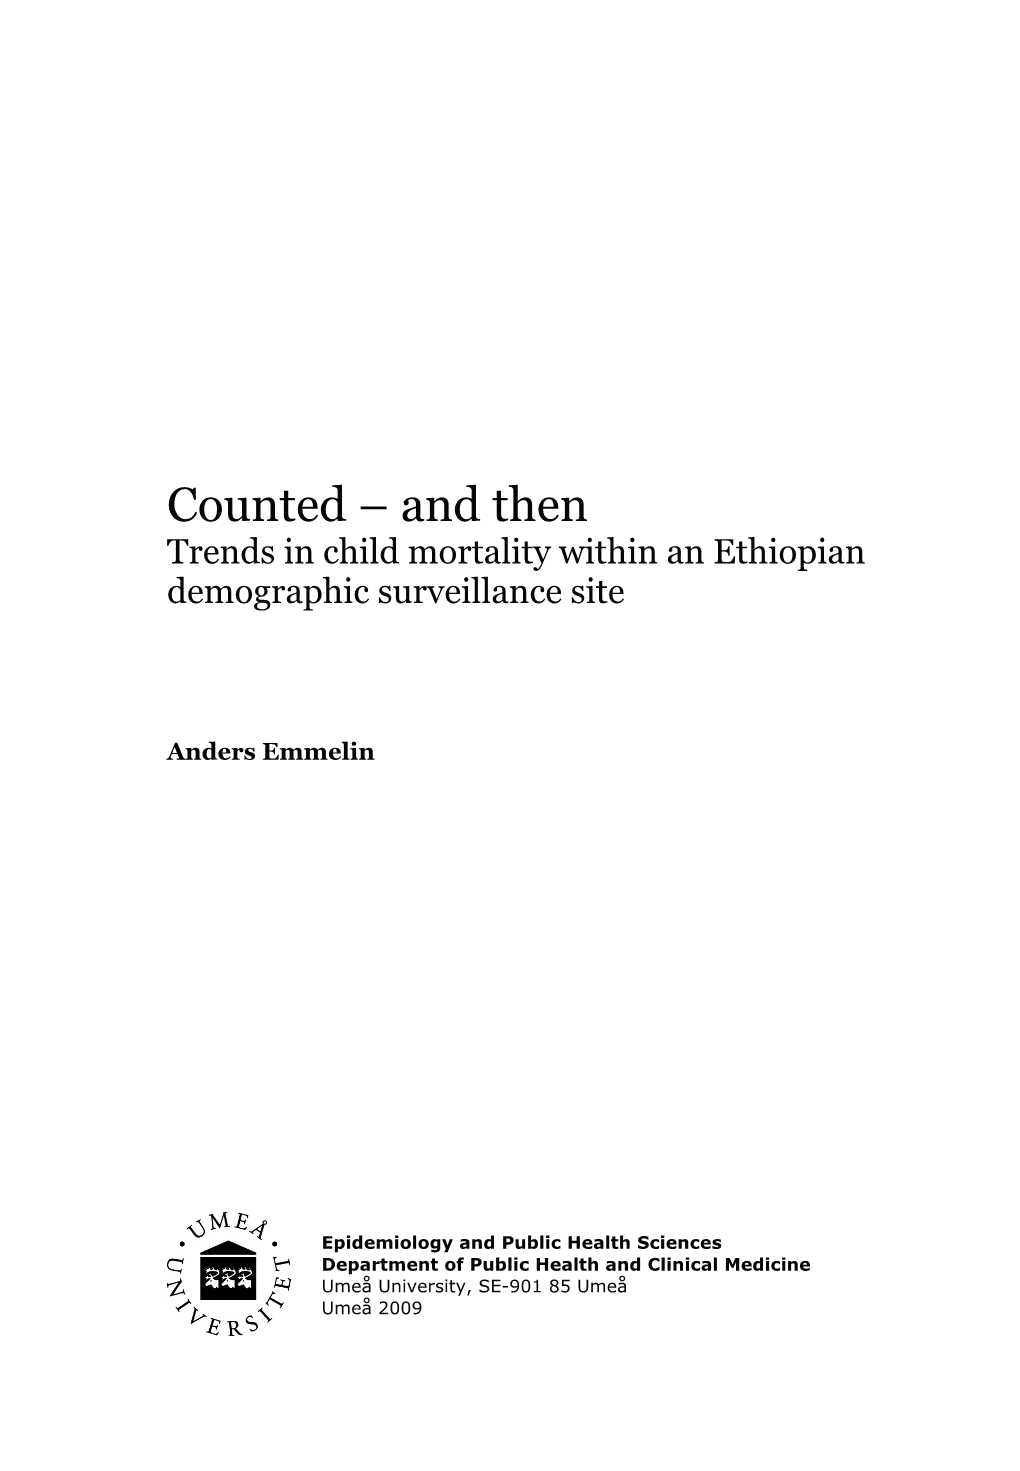 Counted – and Then Trends in Child Mortality Within an Ethiopian Demographic Surveillance Site